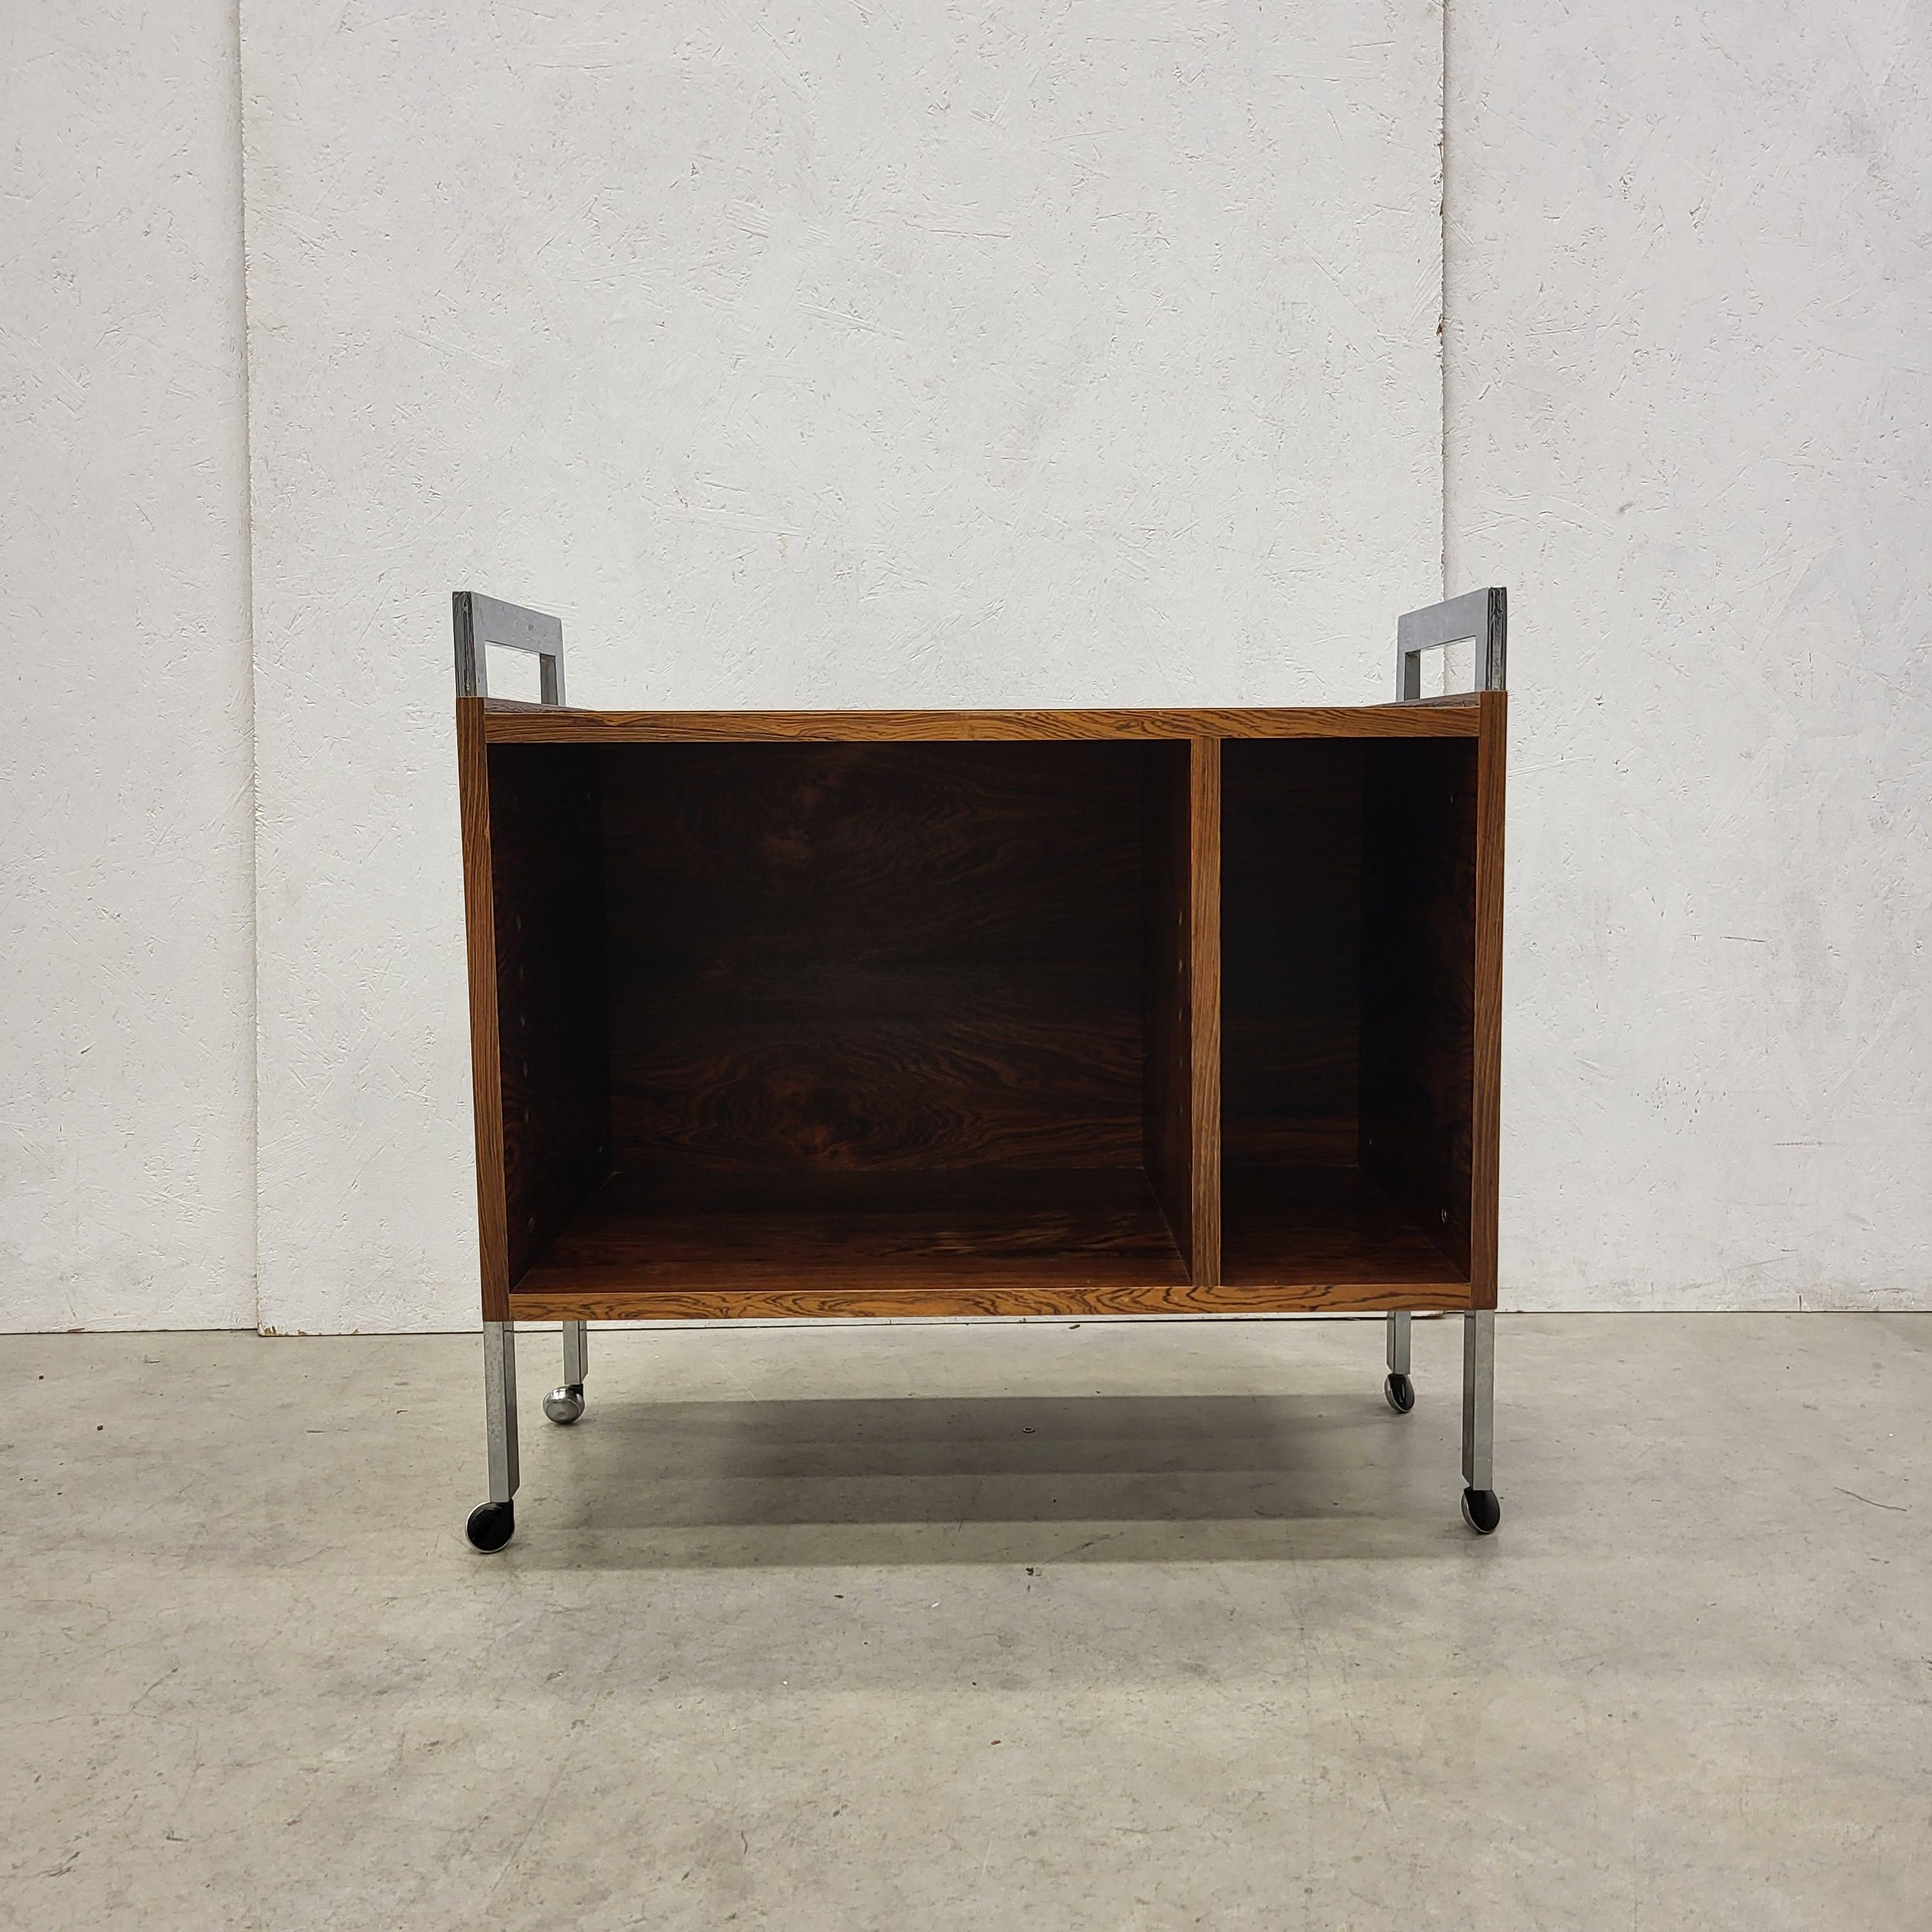 Rare midcentury cabinet trolley by Bodil Kjaer for E. Pederson Son.
Designed in 1959 and made in Denmark in a very low production line in the late 50s, early 60s.

Impressive veneer & wood structure. Stunning piece!
Reduced design made with highest